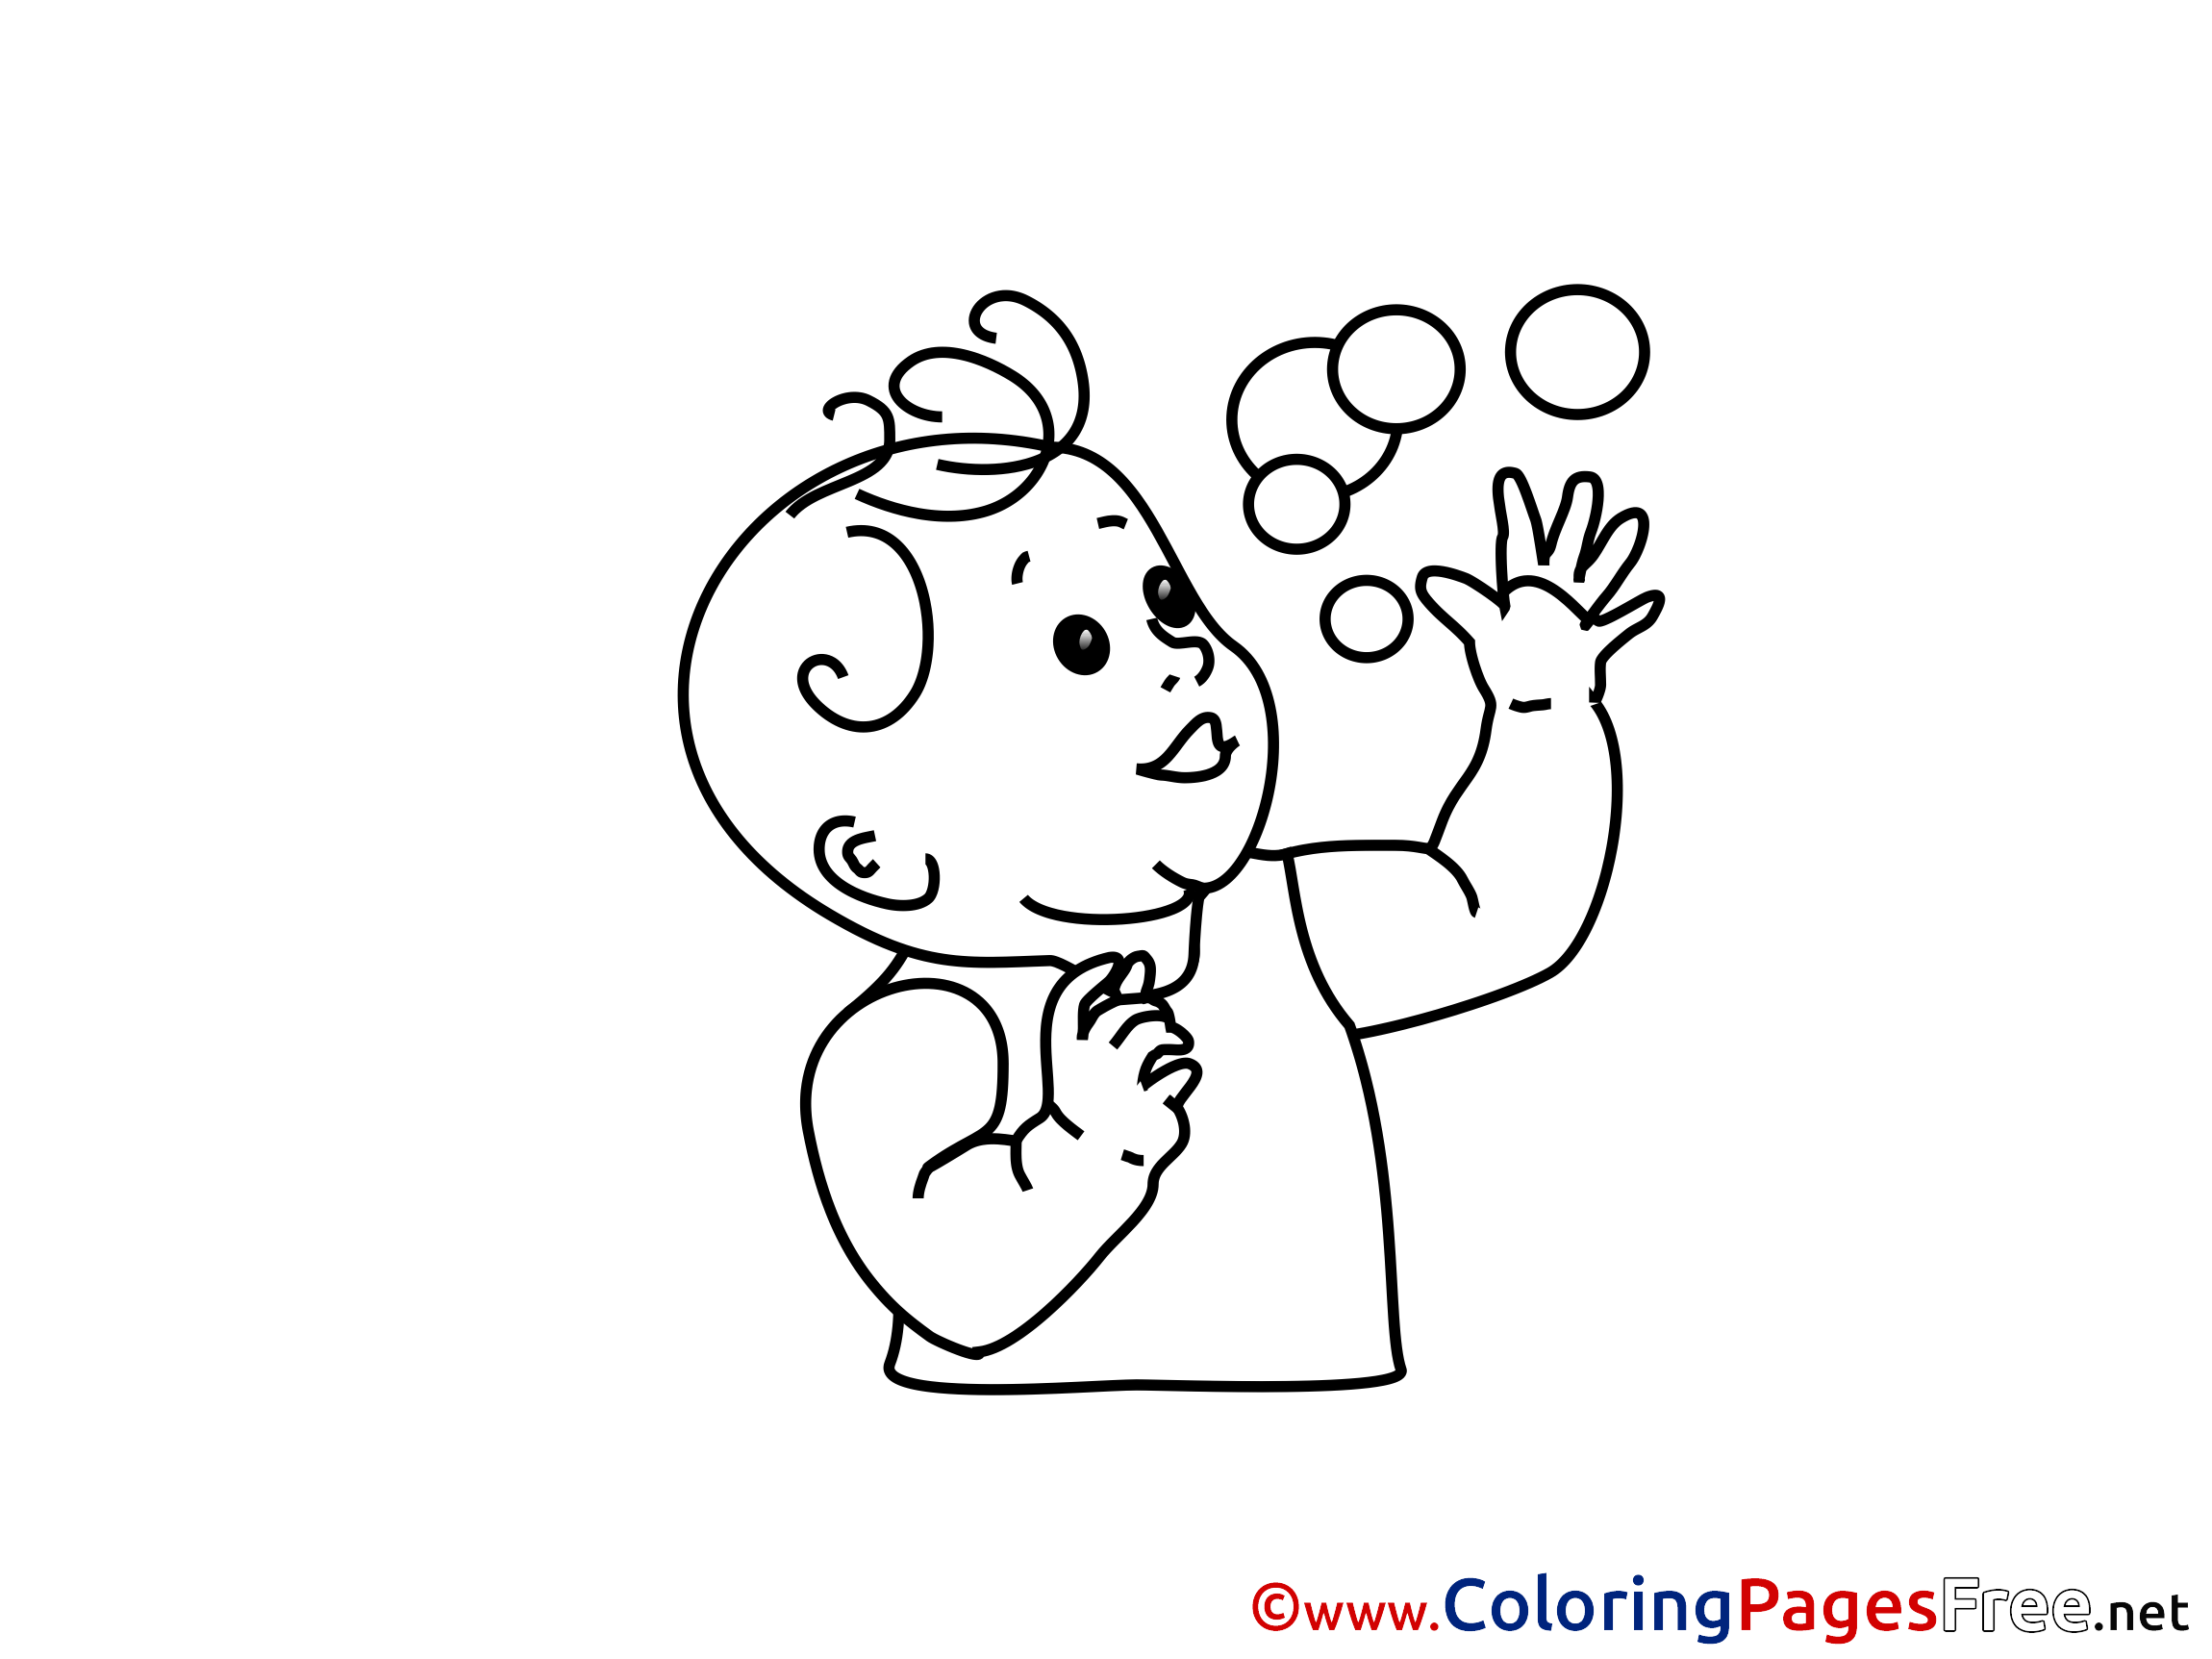 bubbles-coloring-sheets-download-free